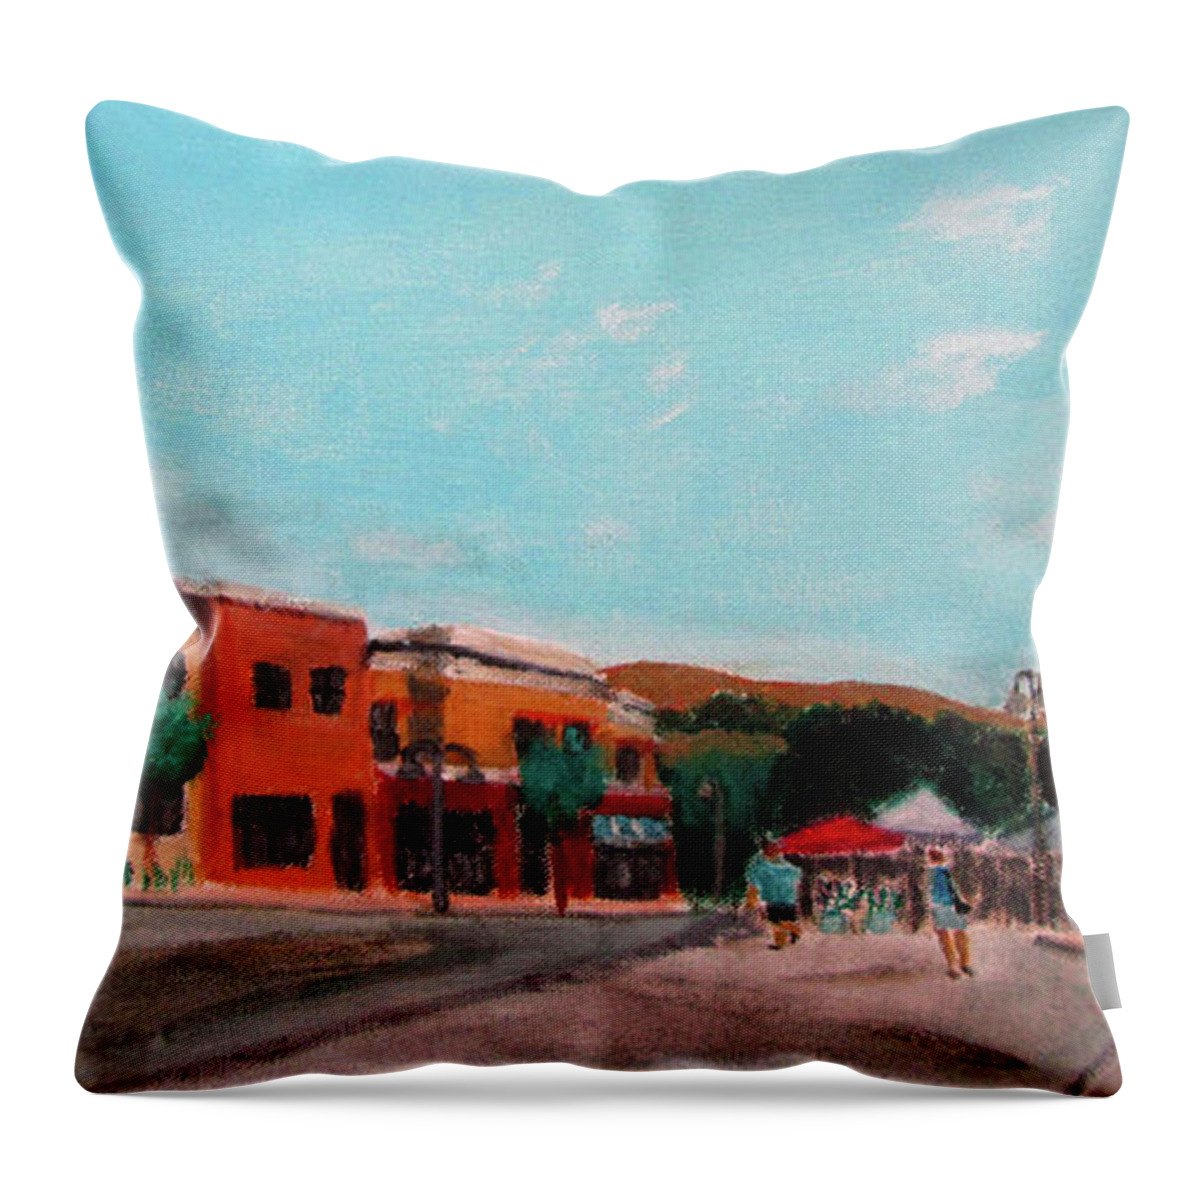 Farmers Market Throw Pillow featuring the painting Market Day by Linda Feinberg